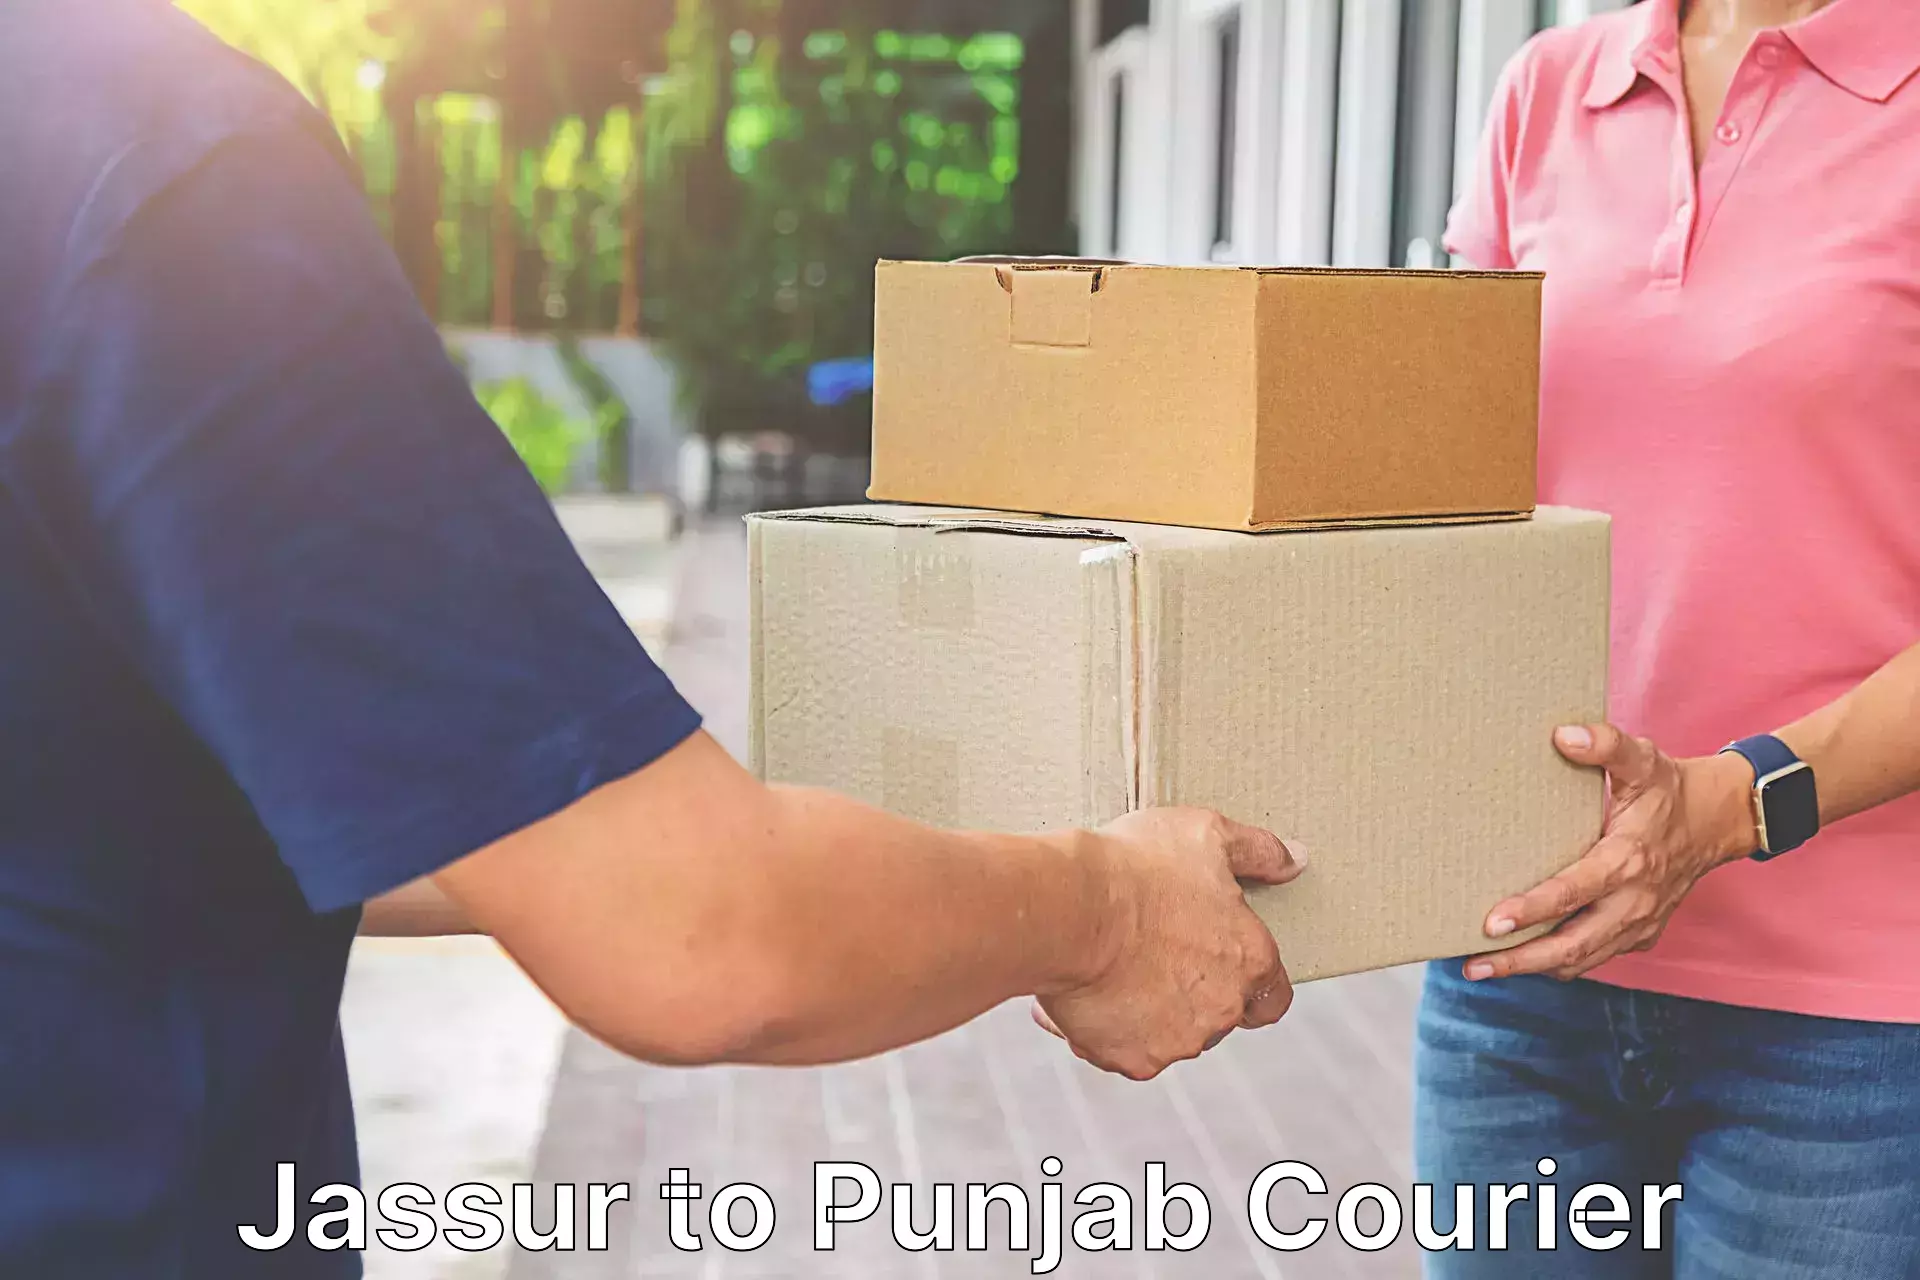 Heavy parcel delivery in Jassur to Punjab